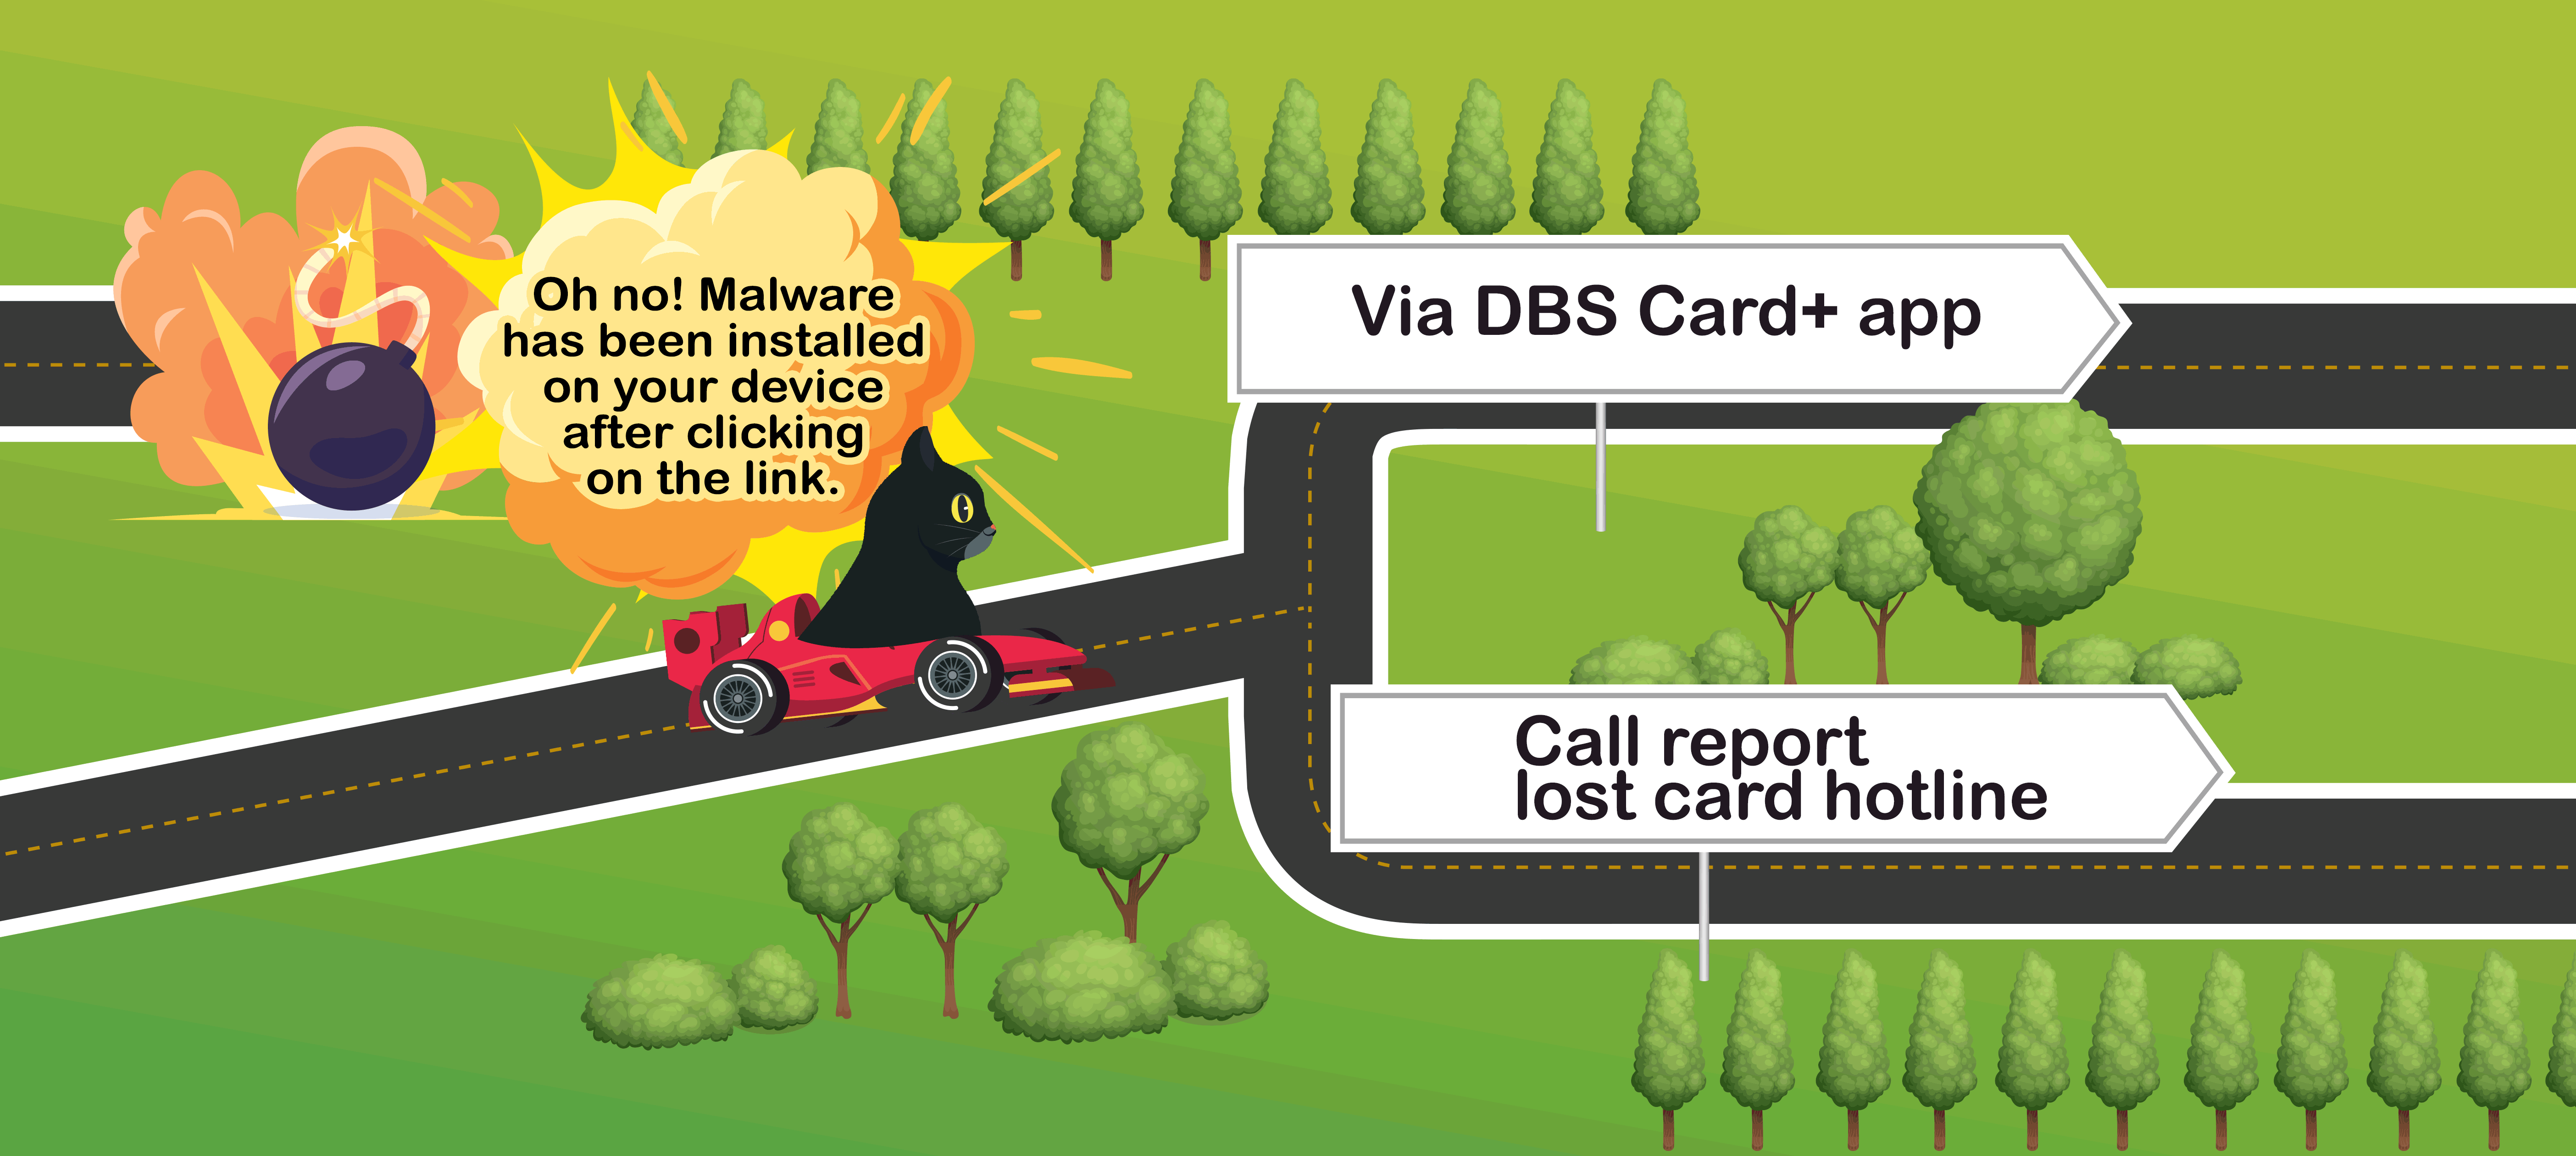 How to report your lost card when you are at work?